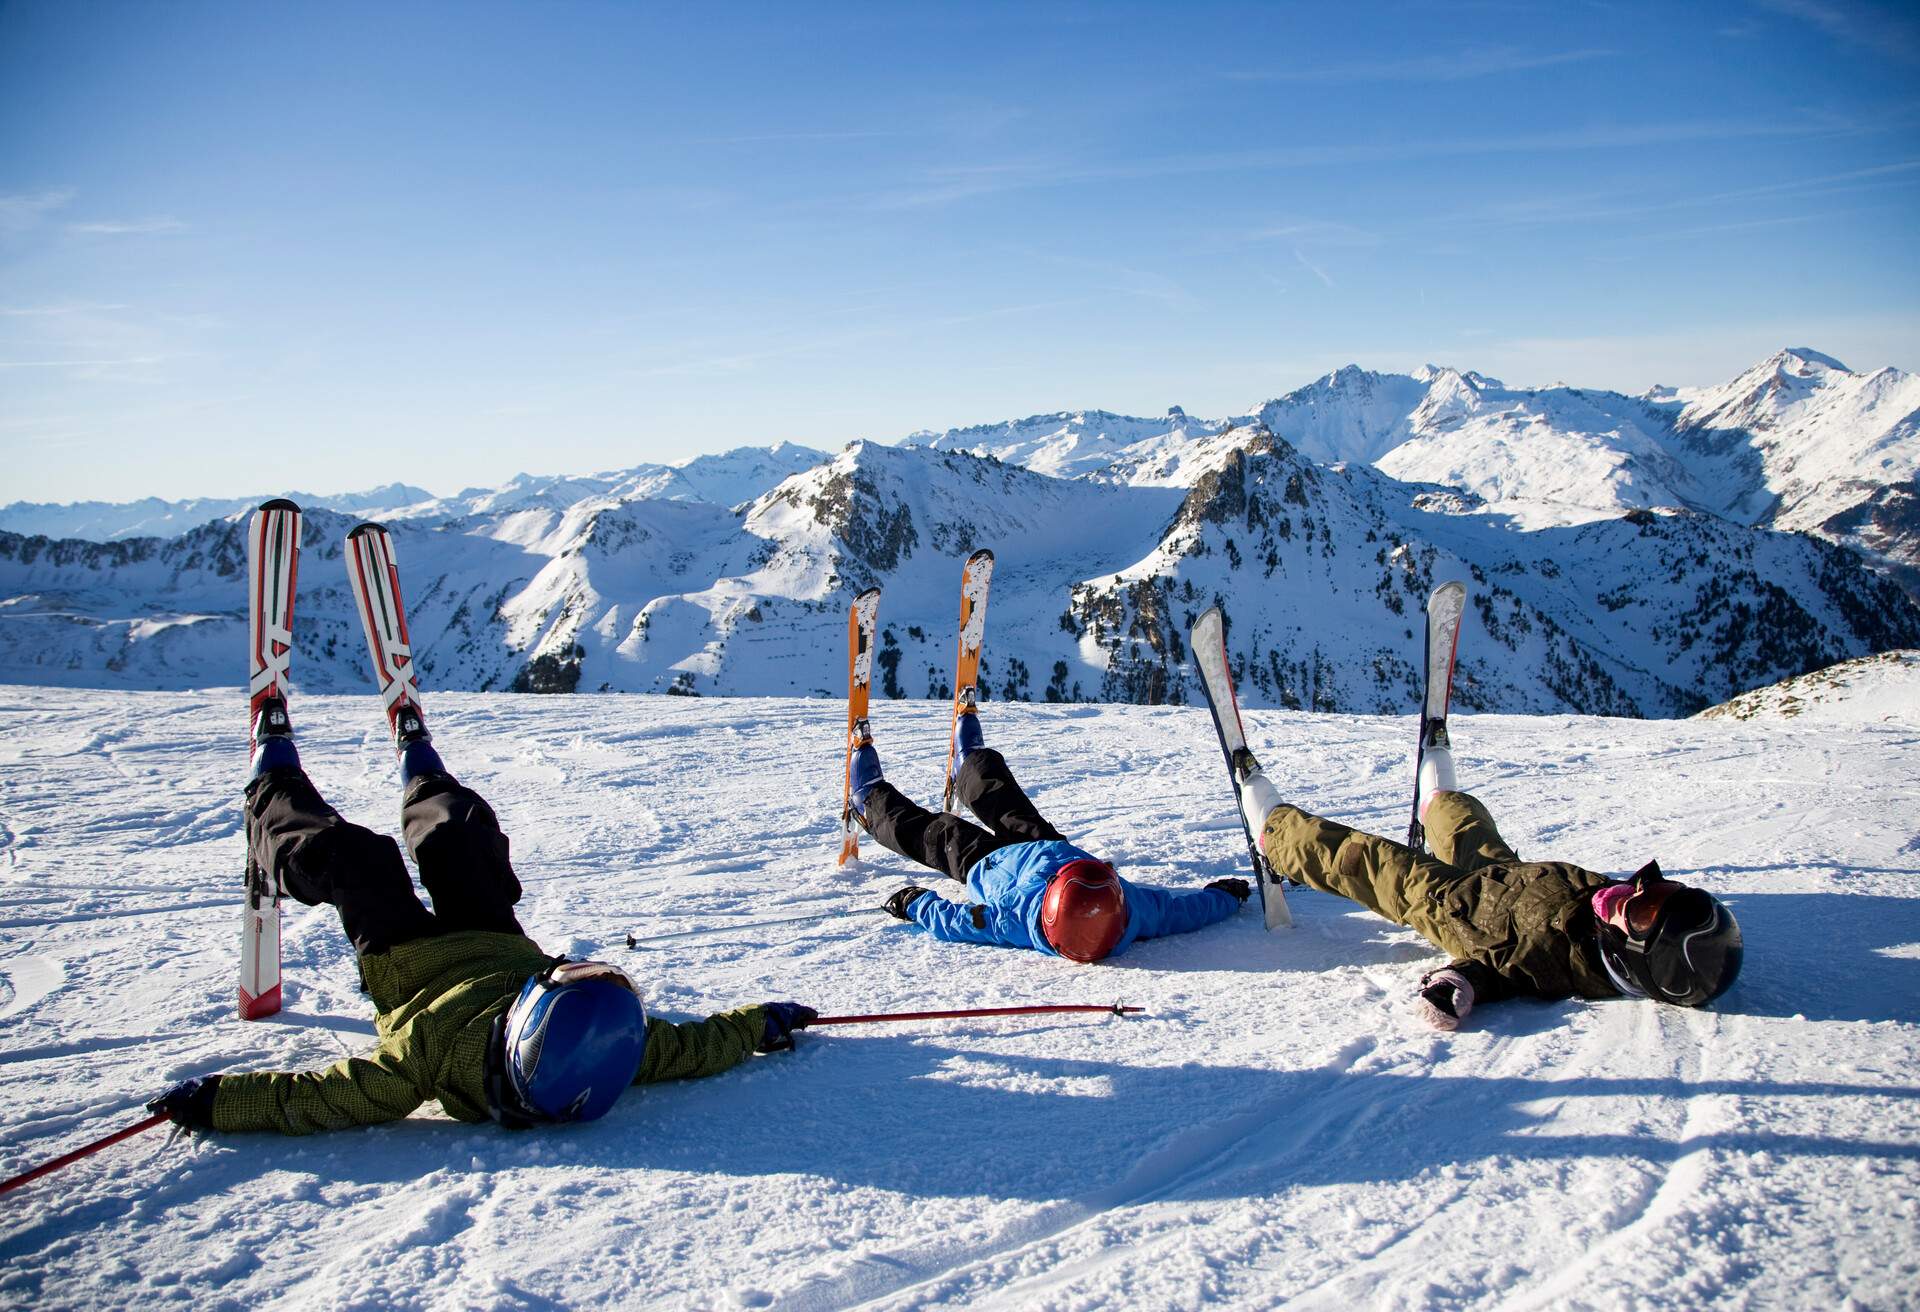 Three skiers with their ski fix, lying down in powder snow land overlooking the rocky mountains covered in snow.